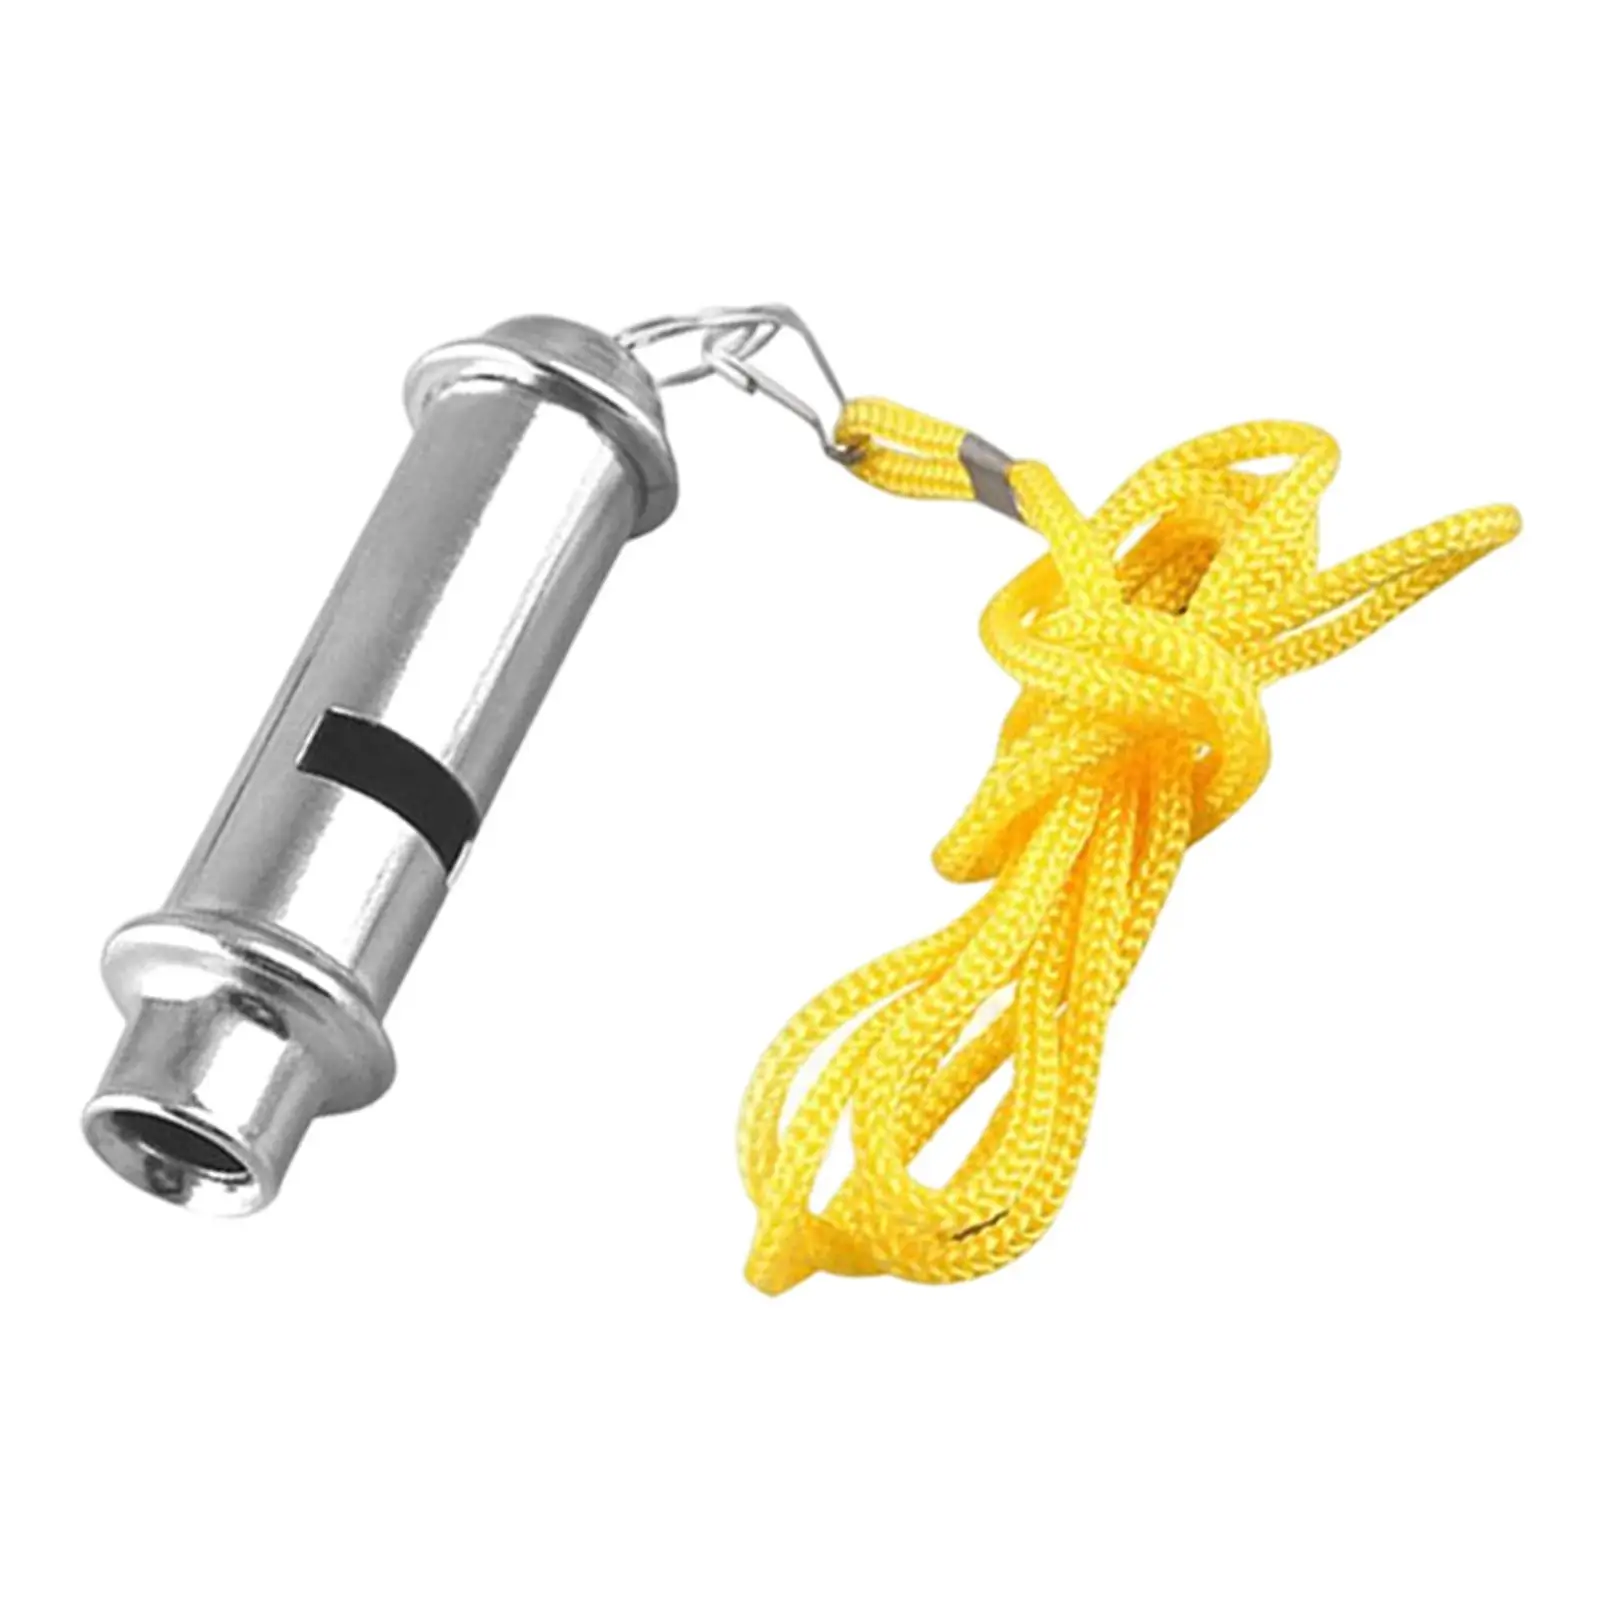 Portable Emergency Whistle Outdoor Safety Whistle Loud Sound for Hiking